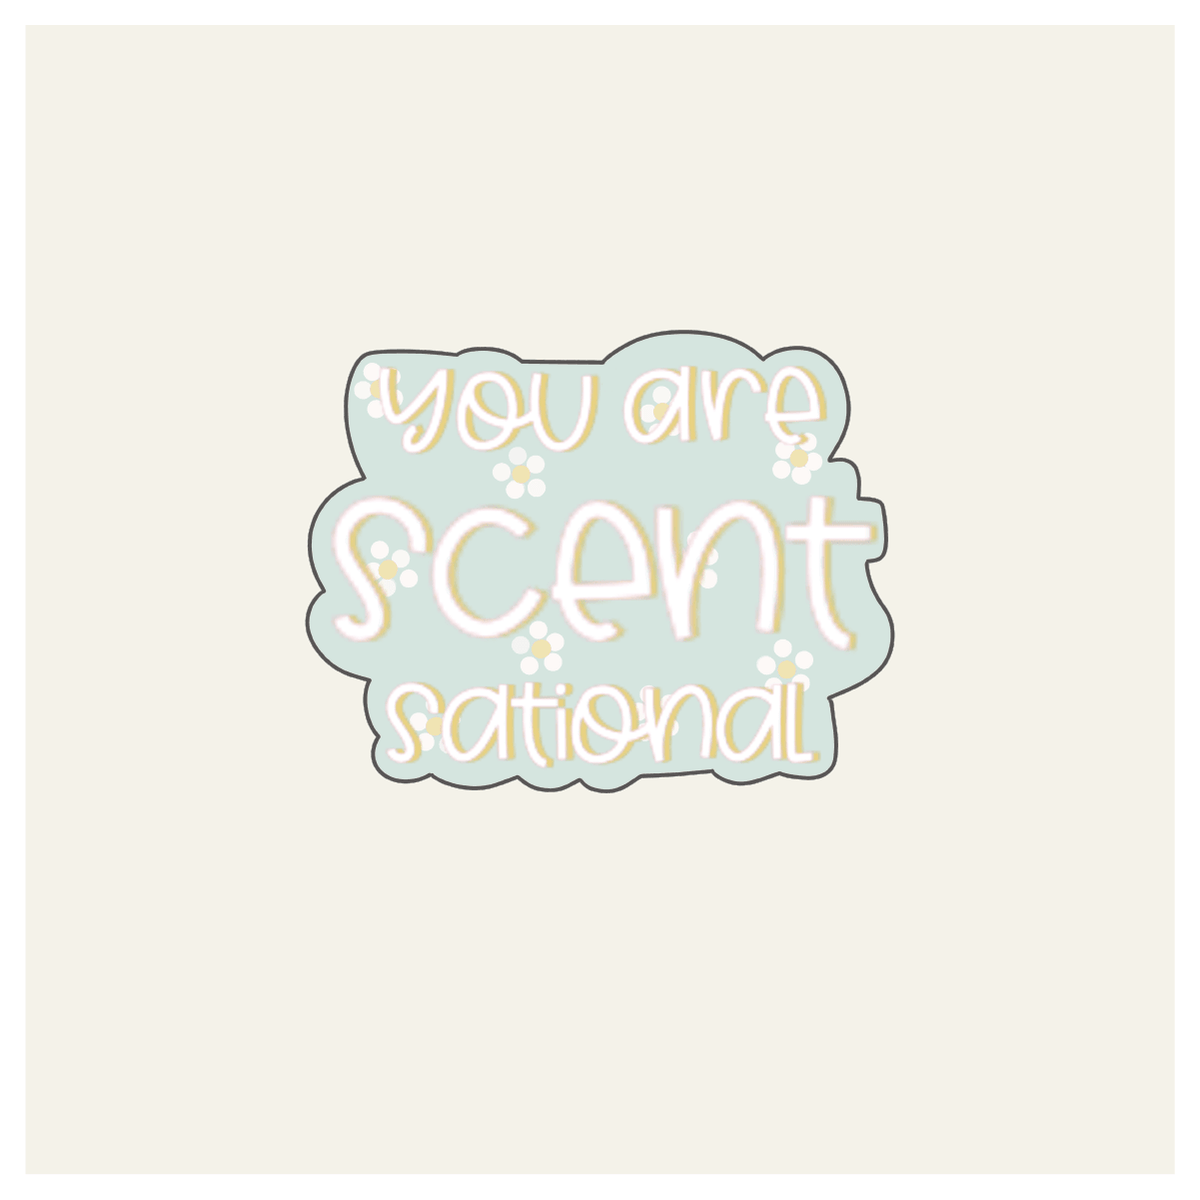 You are Scent Sational Hand Lettered Cookie Cutter - Sweetleigh 